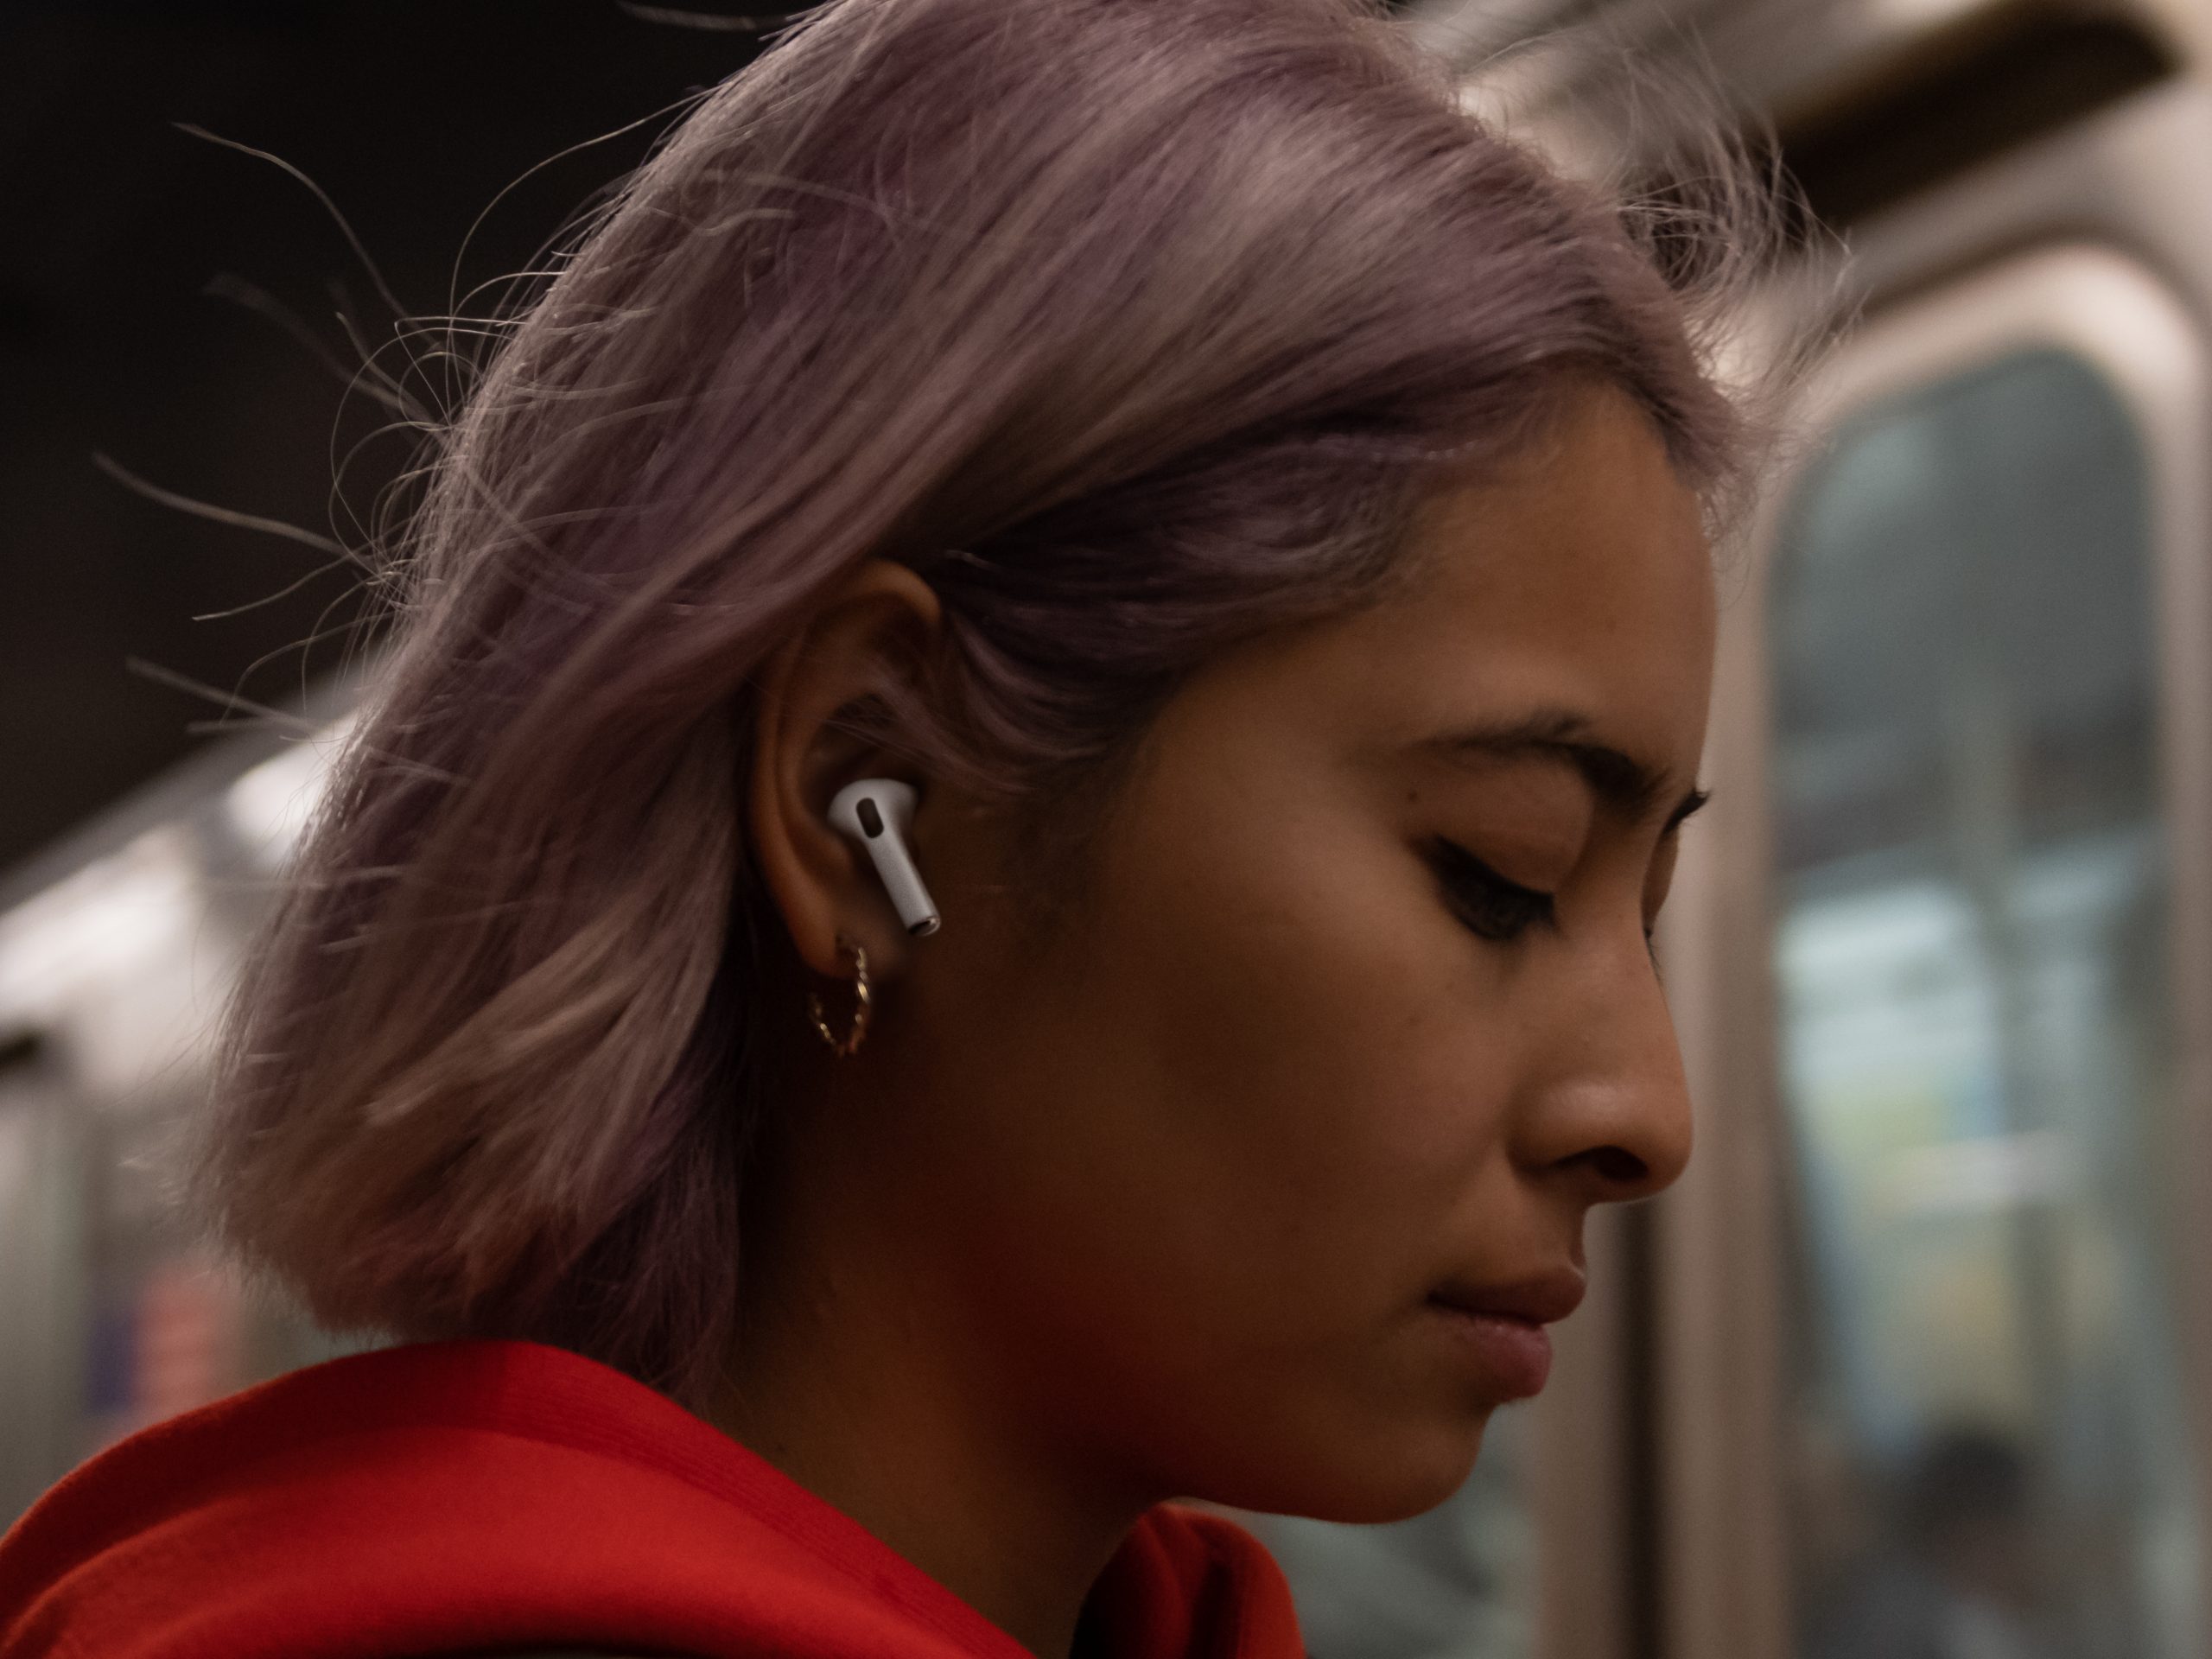 Sony airpods. Девушка с наушниками AIRPODS. Девушка в AIRPODS Pro. Девушка в беспроводных наушниках. AIRPODS Pro в ушах.